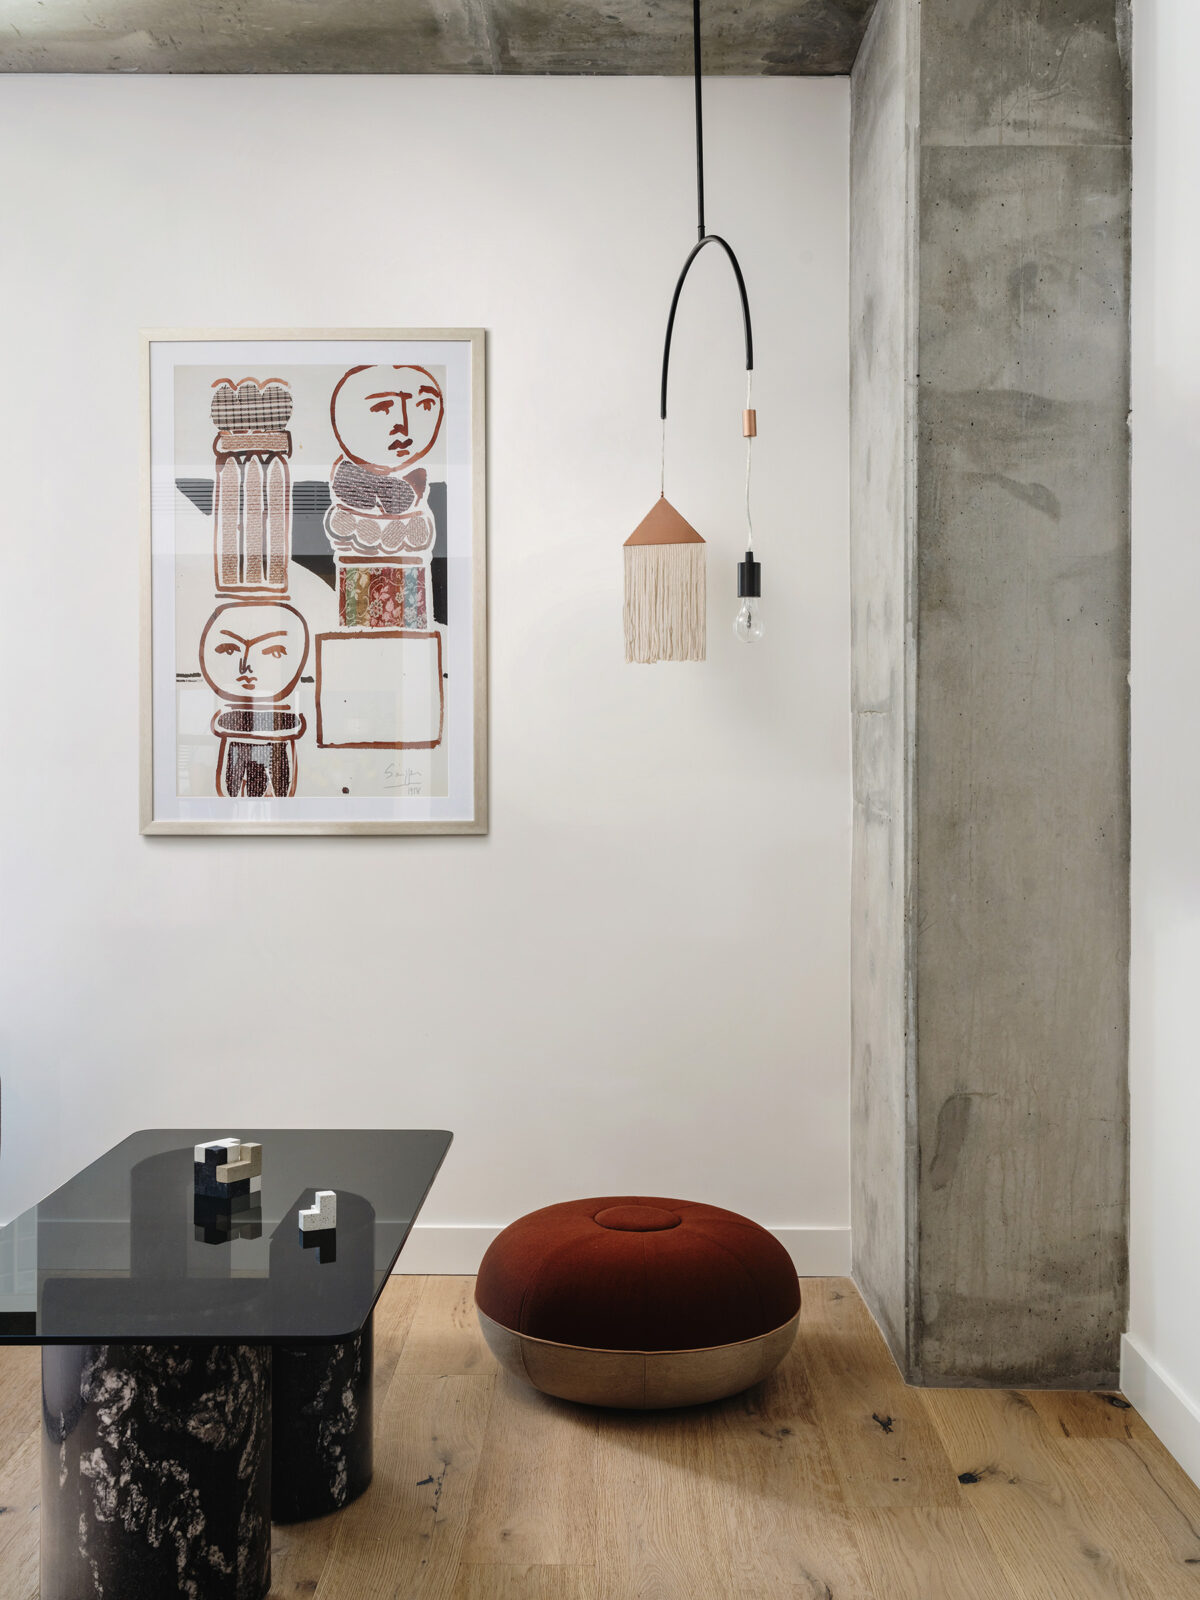 A black coffee table, red pouf, and artwork in the corner of a room